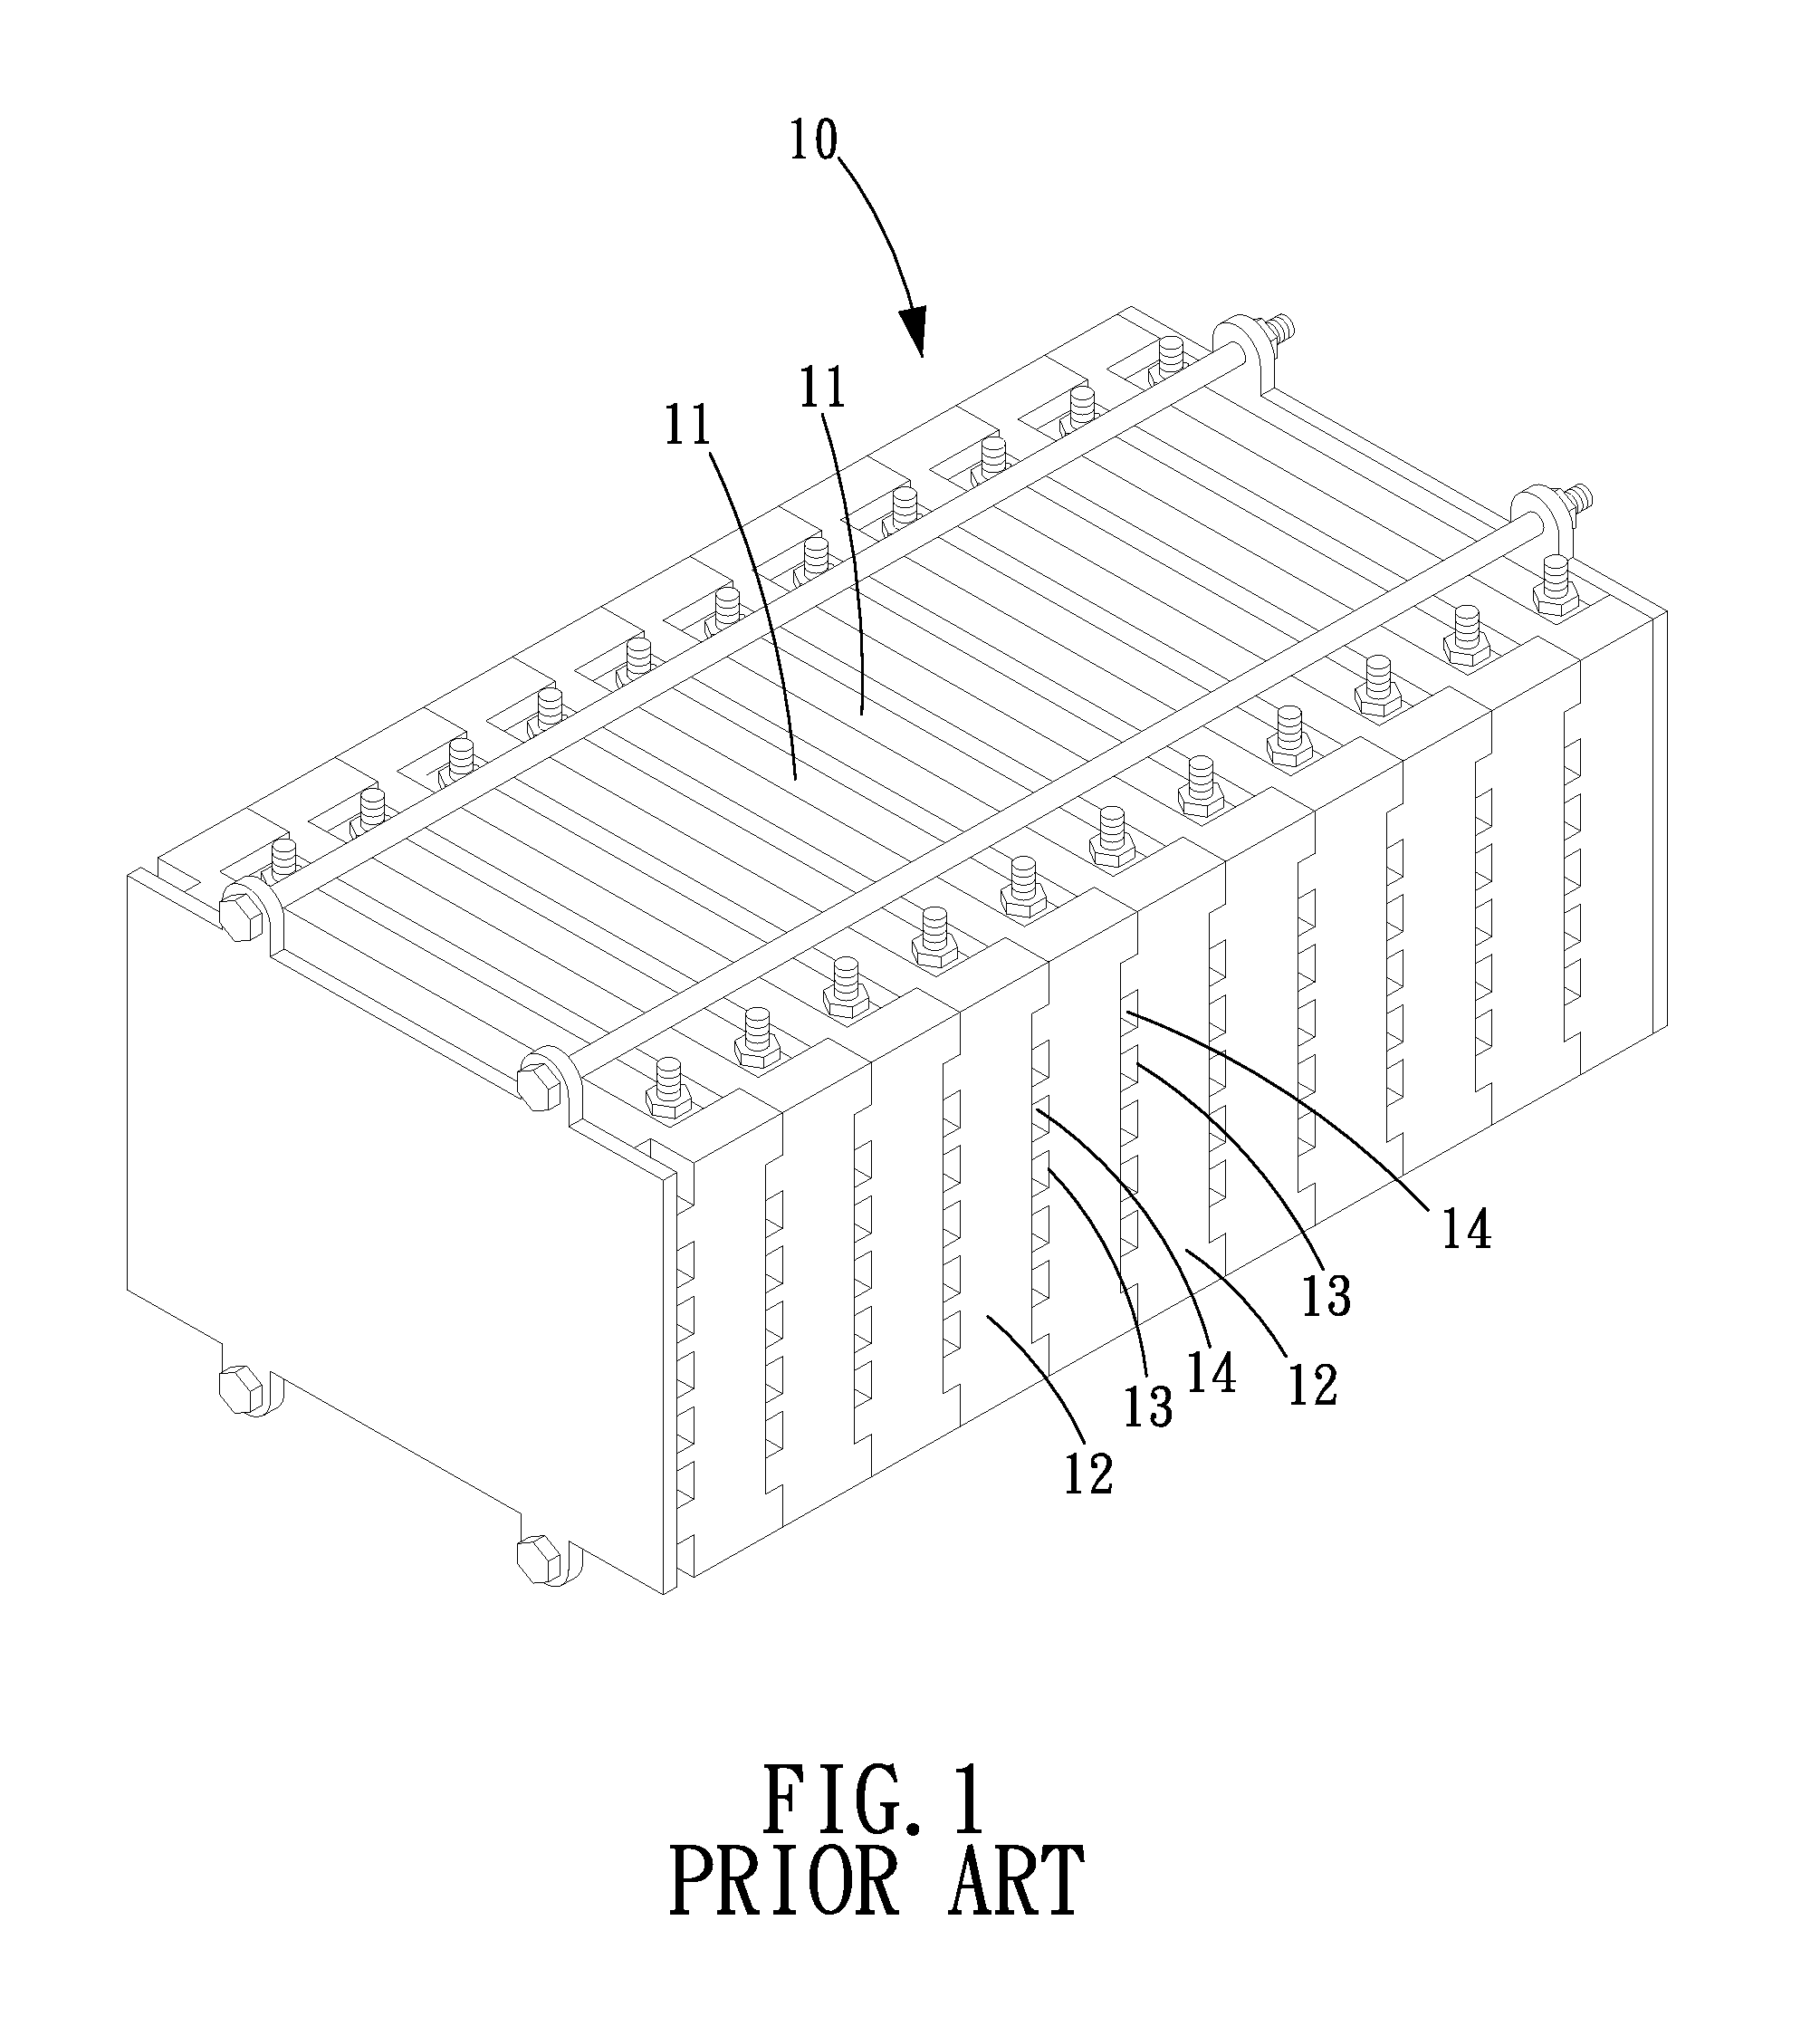 Battery Pack with a Heat Dissipation Structure